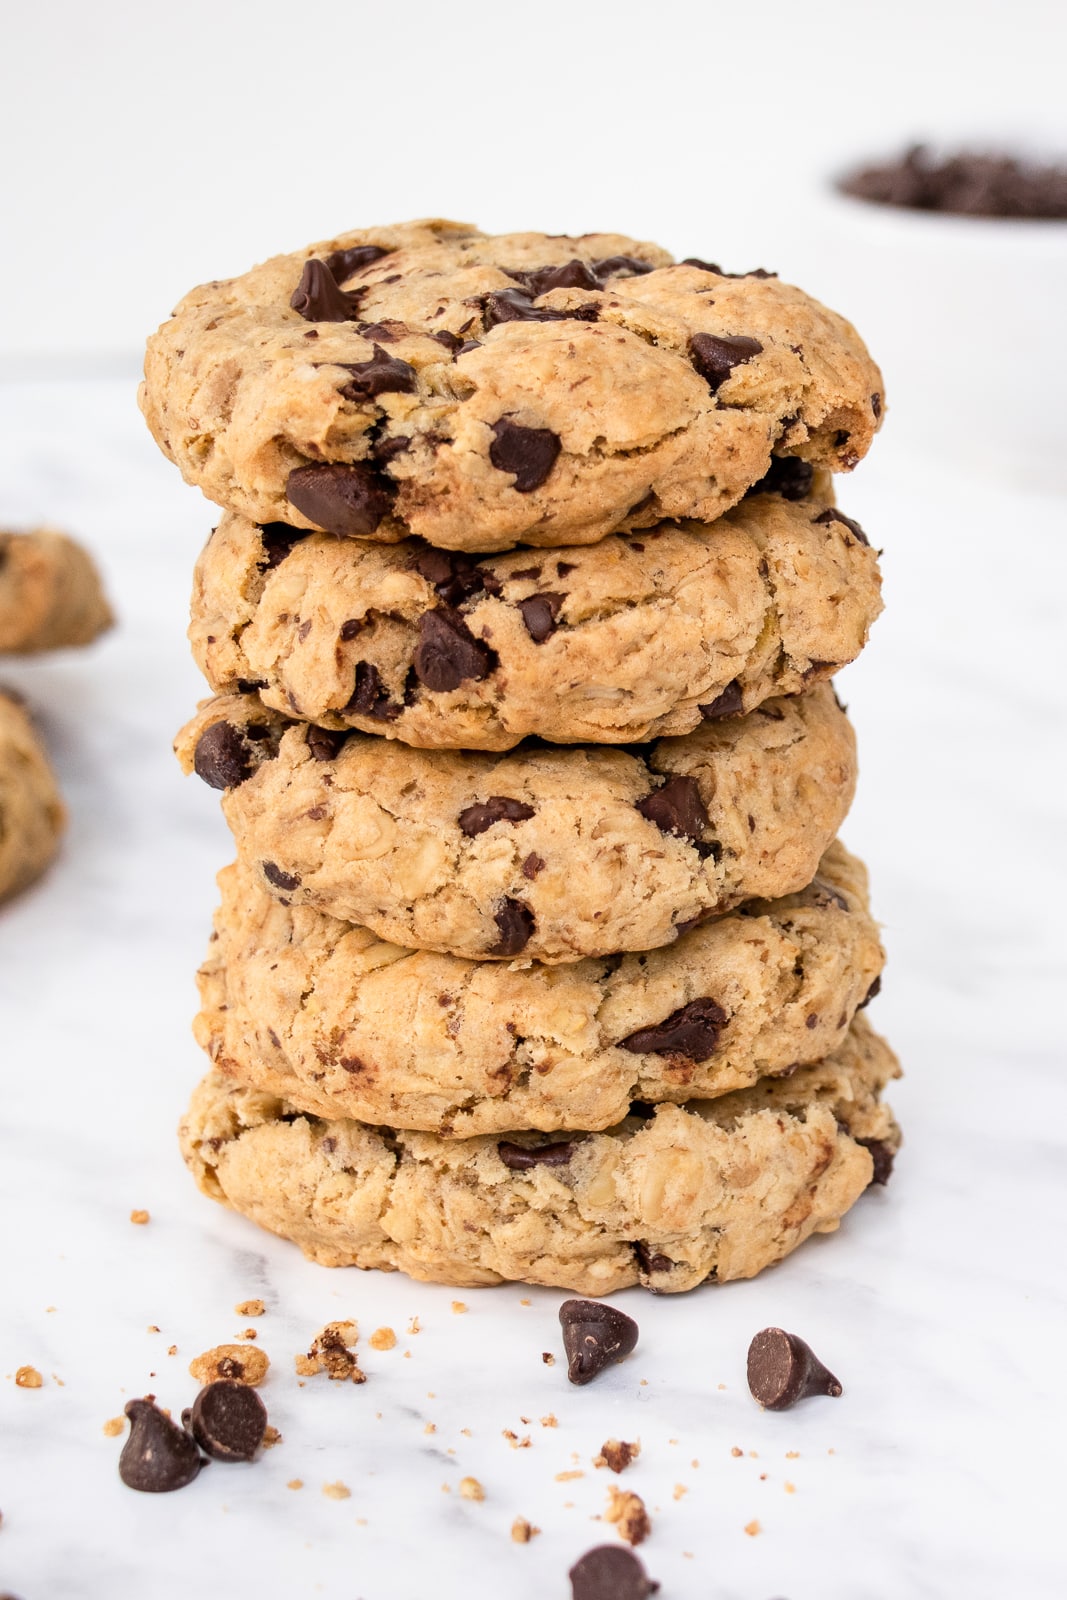 Close-up shot of a stack of 5 thick oatmeal chocolate chip cookies